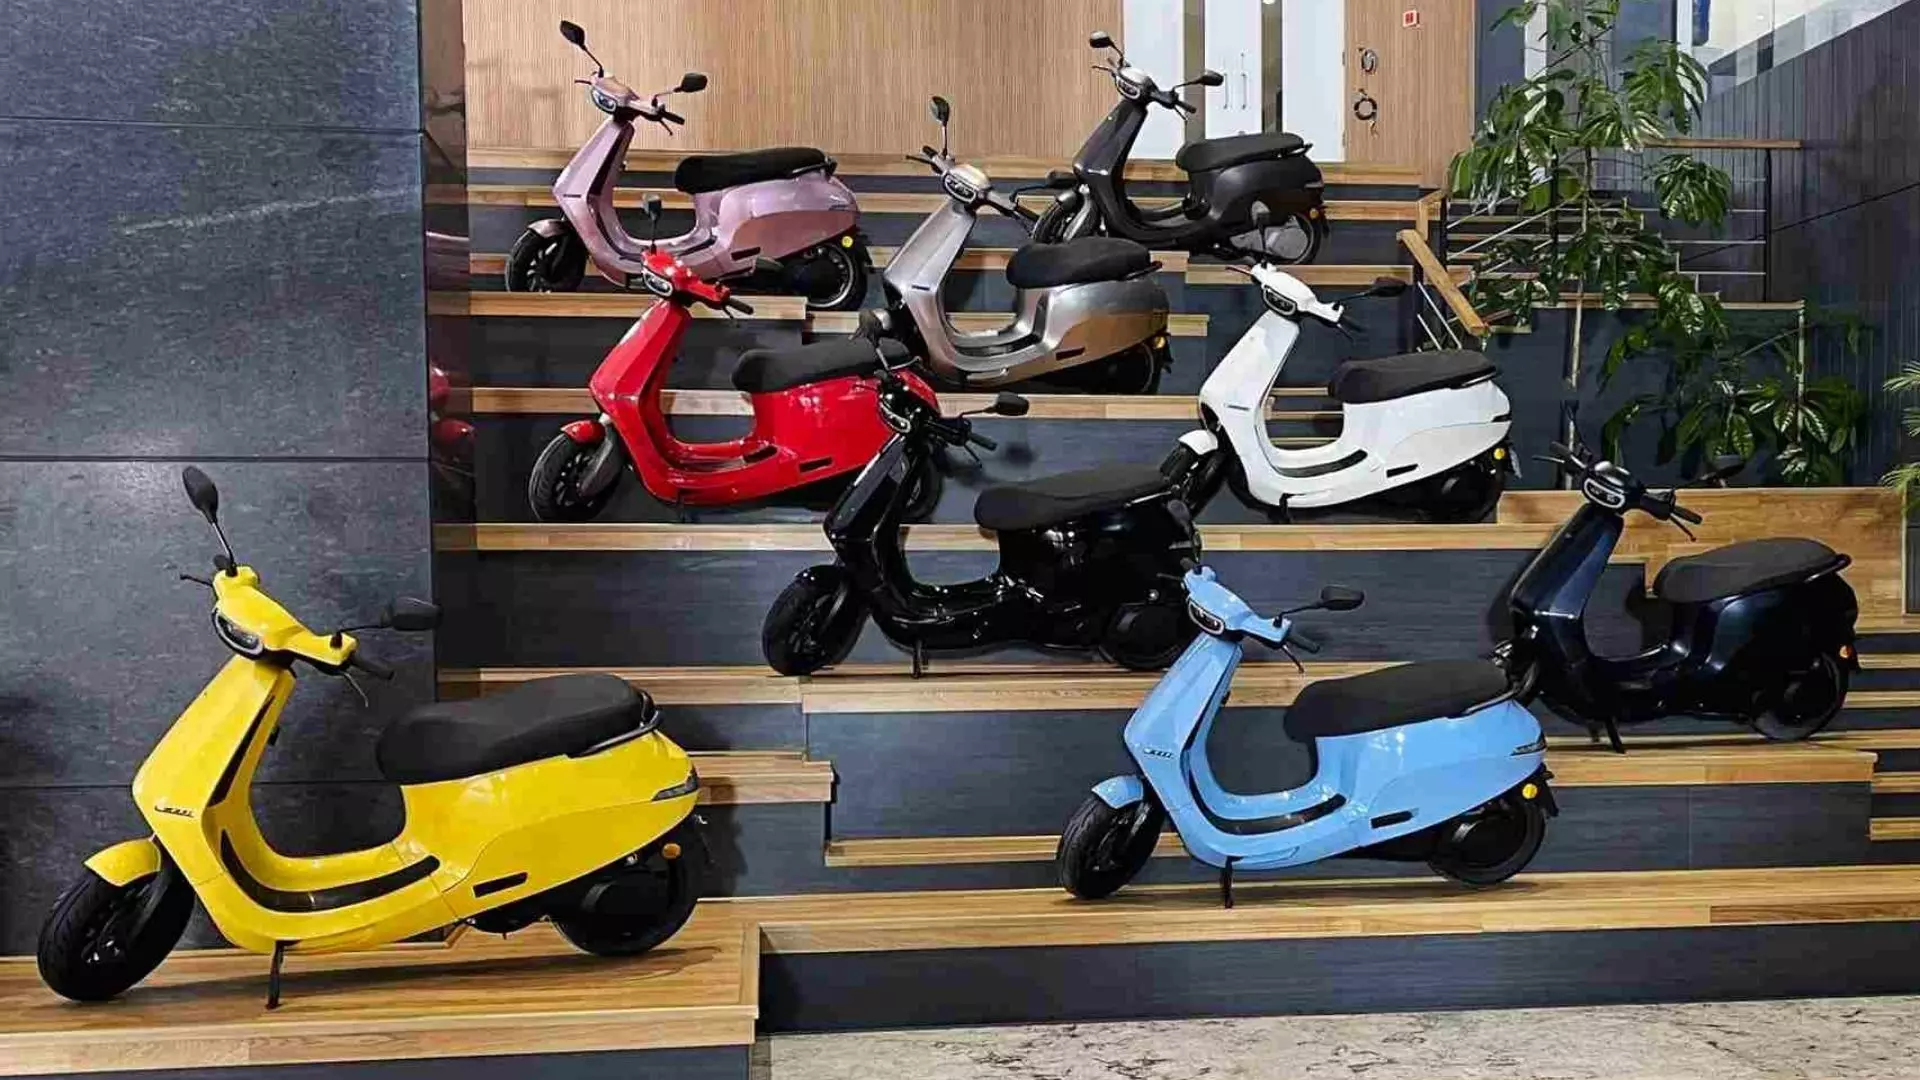 Ola Founder Bhavish Aggarwal Launched S1 And S1 Pro Models in OLA E-Scooter Event on 15th August 2021